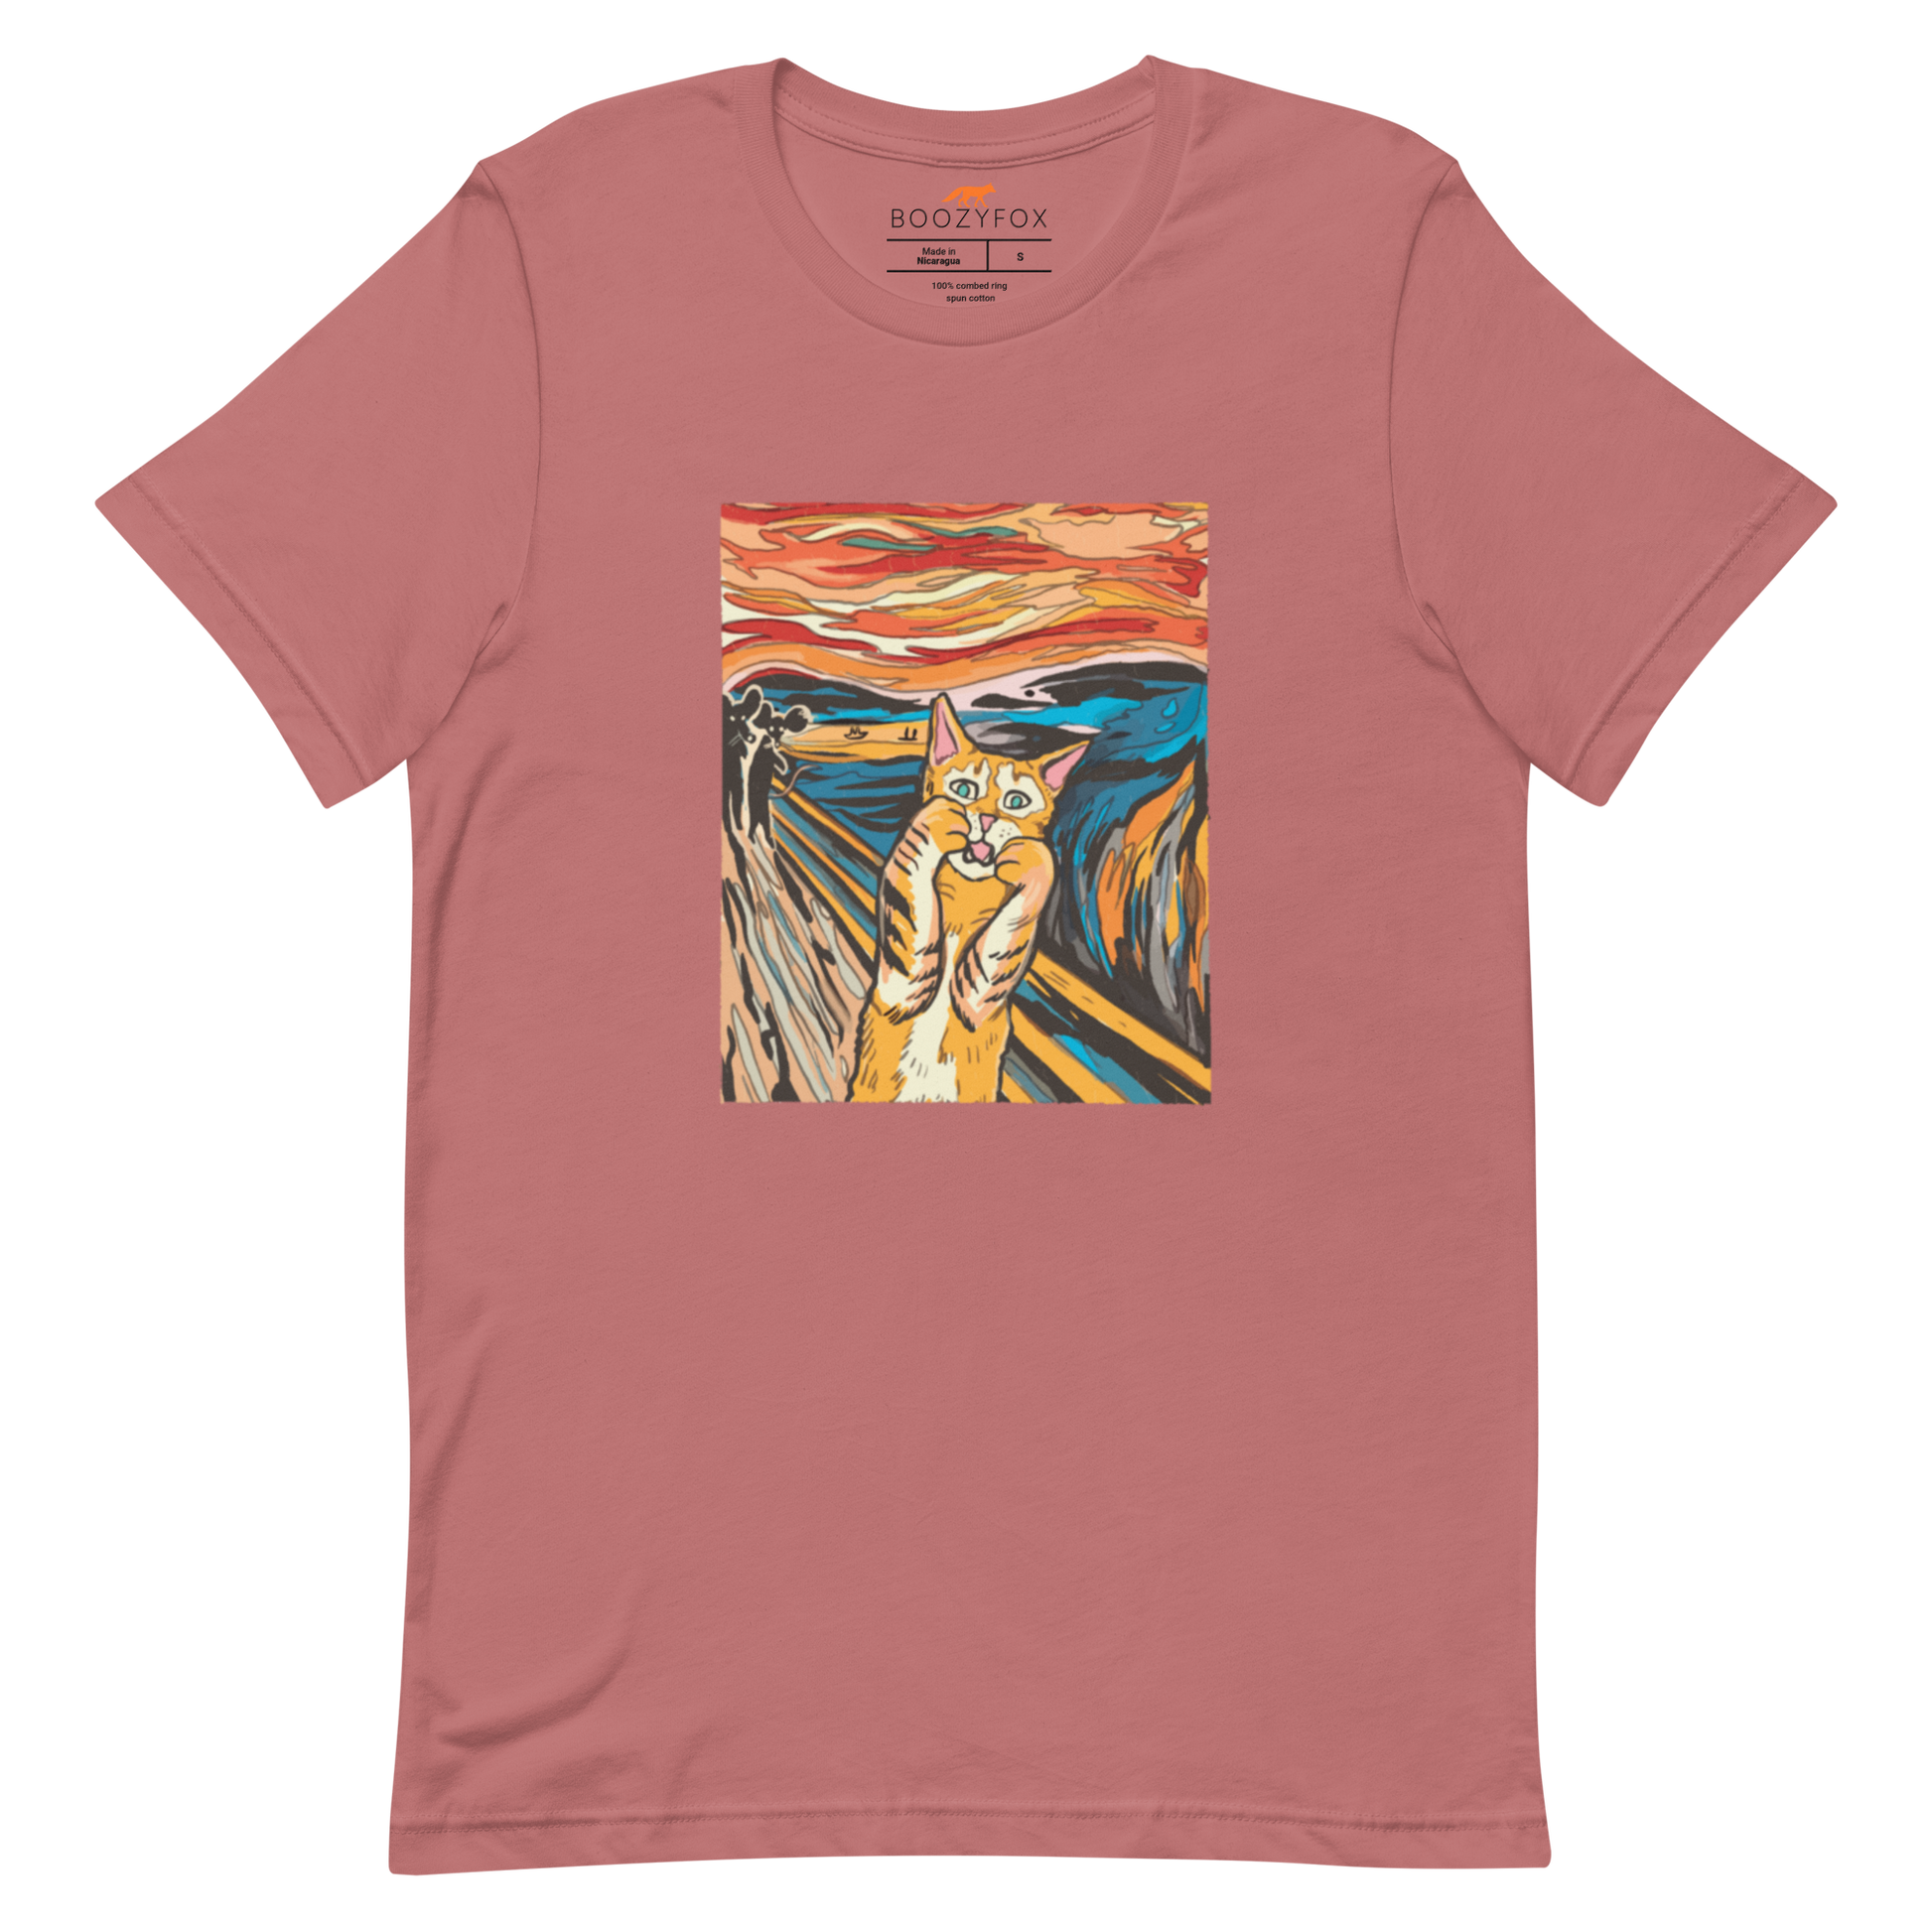 Mauve Premium Screaming Cat T-Shirt showcasing iconic The Screaming Cat graphic on the chest - Funny Graphic Cat Tees - Boozy Fox